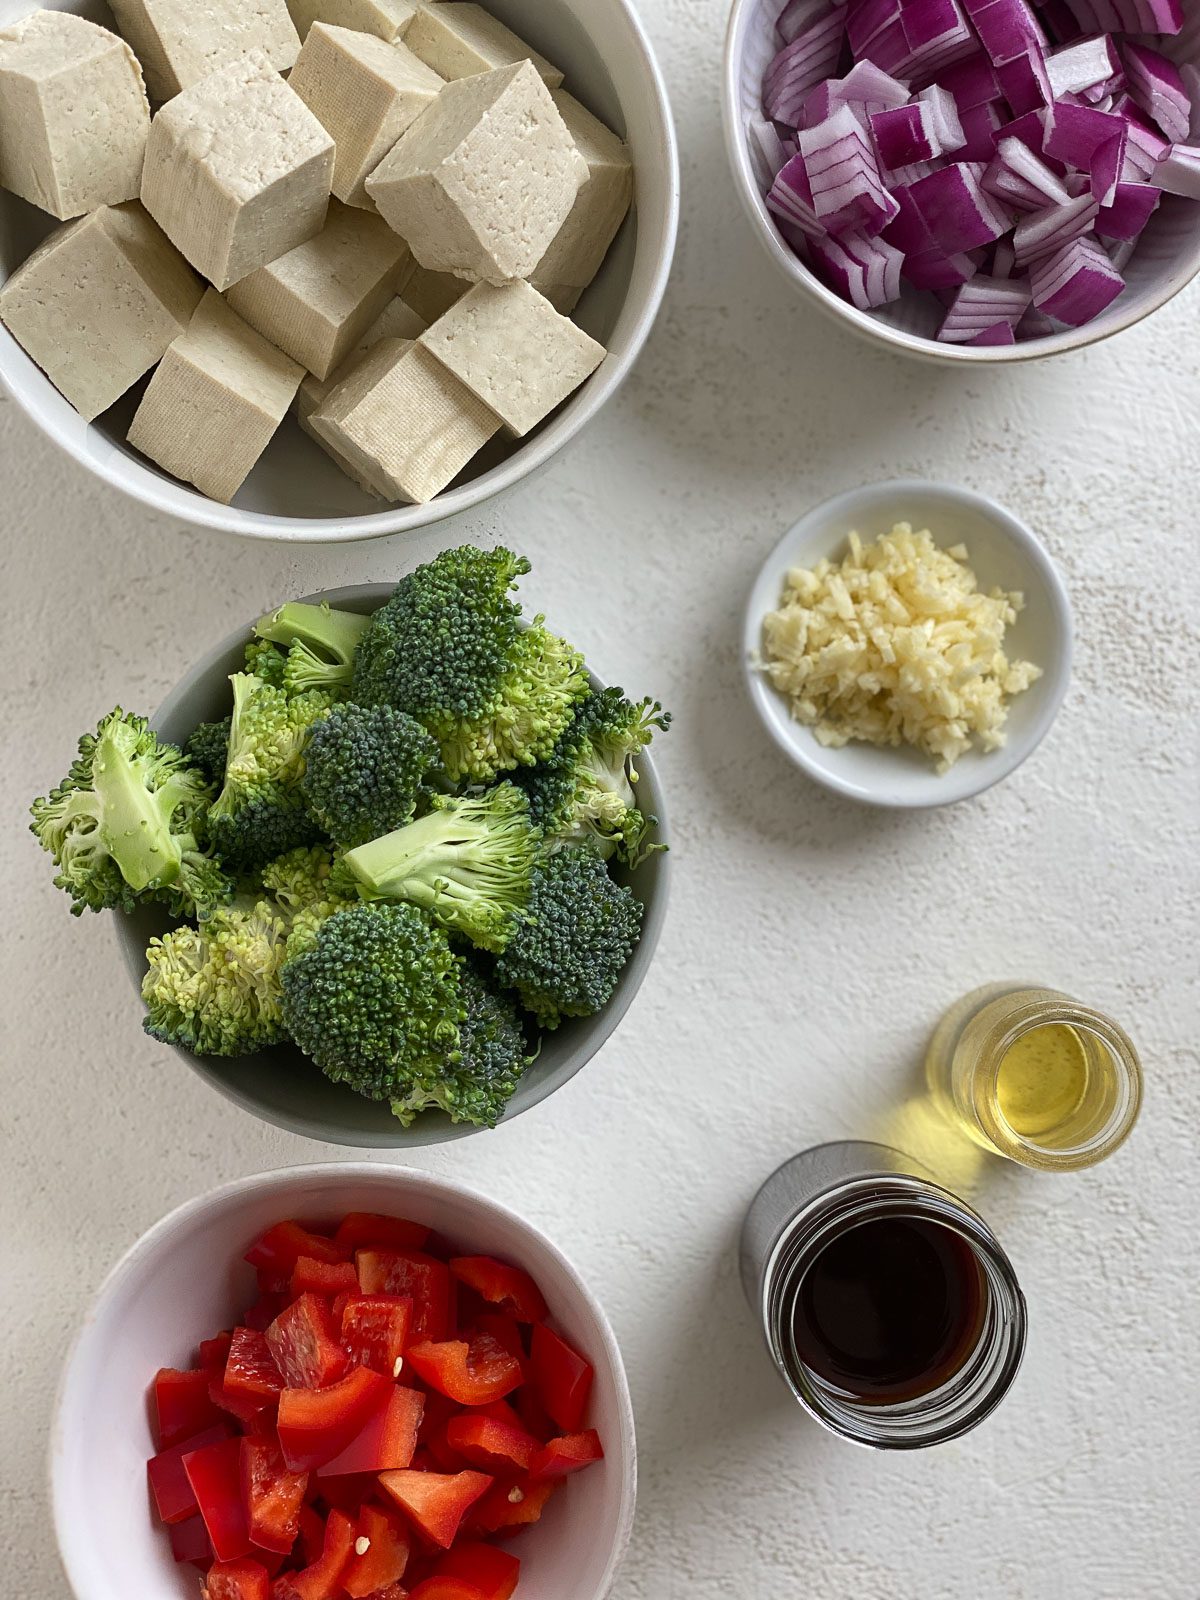 ingredients for Vegan Teriyaki Tofu Stir Fry measured out in bowls against a light surface